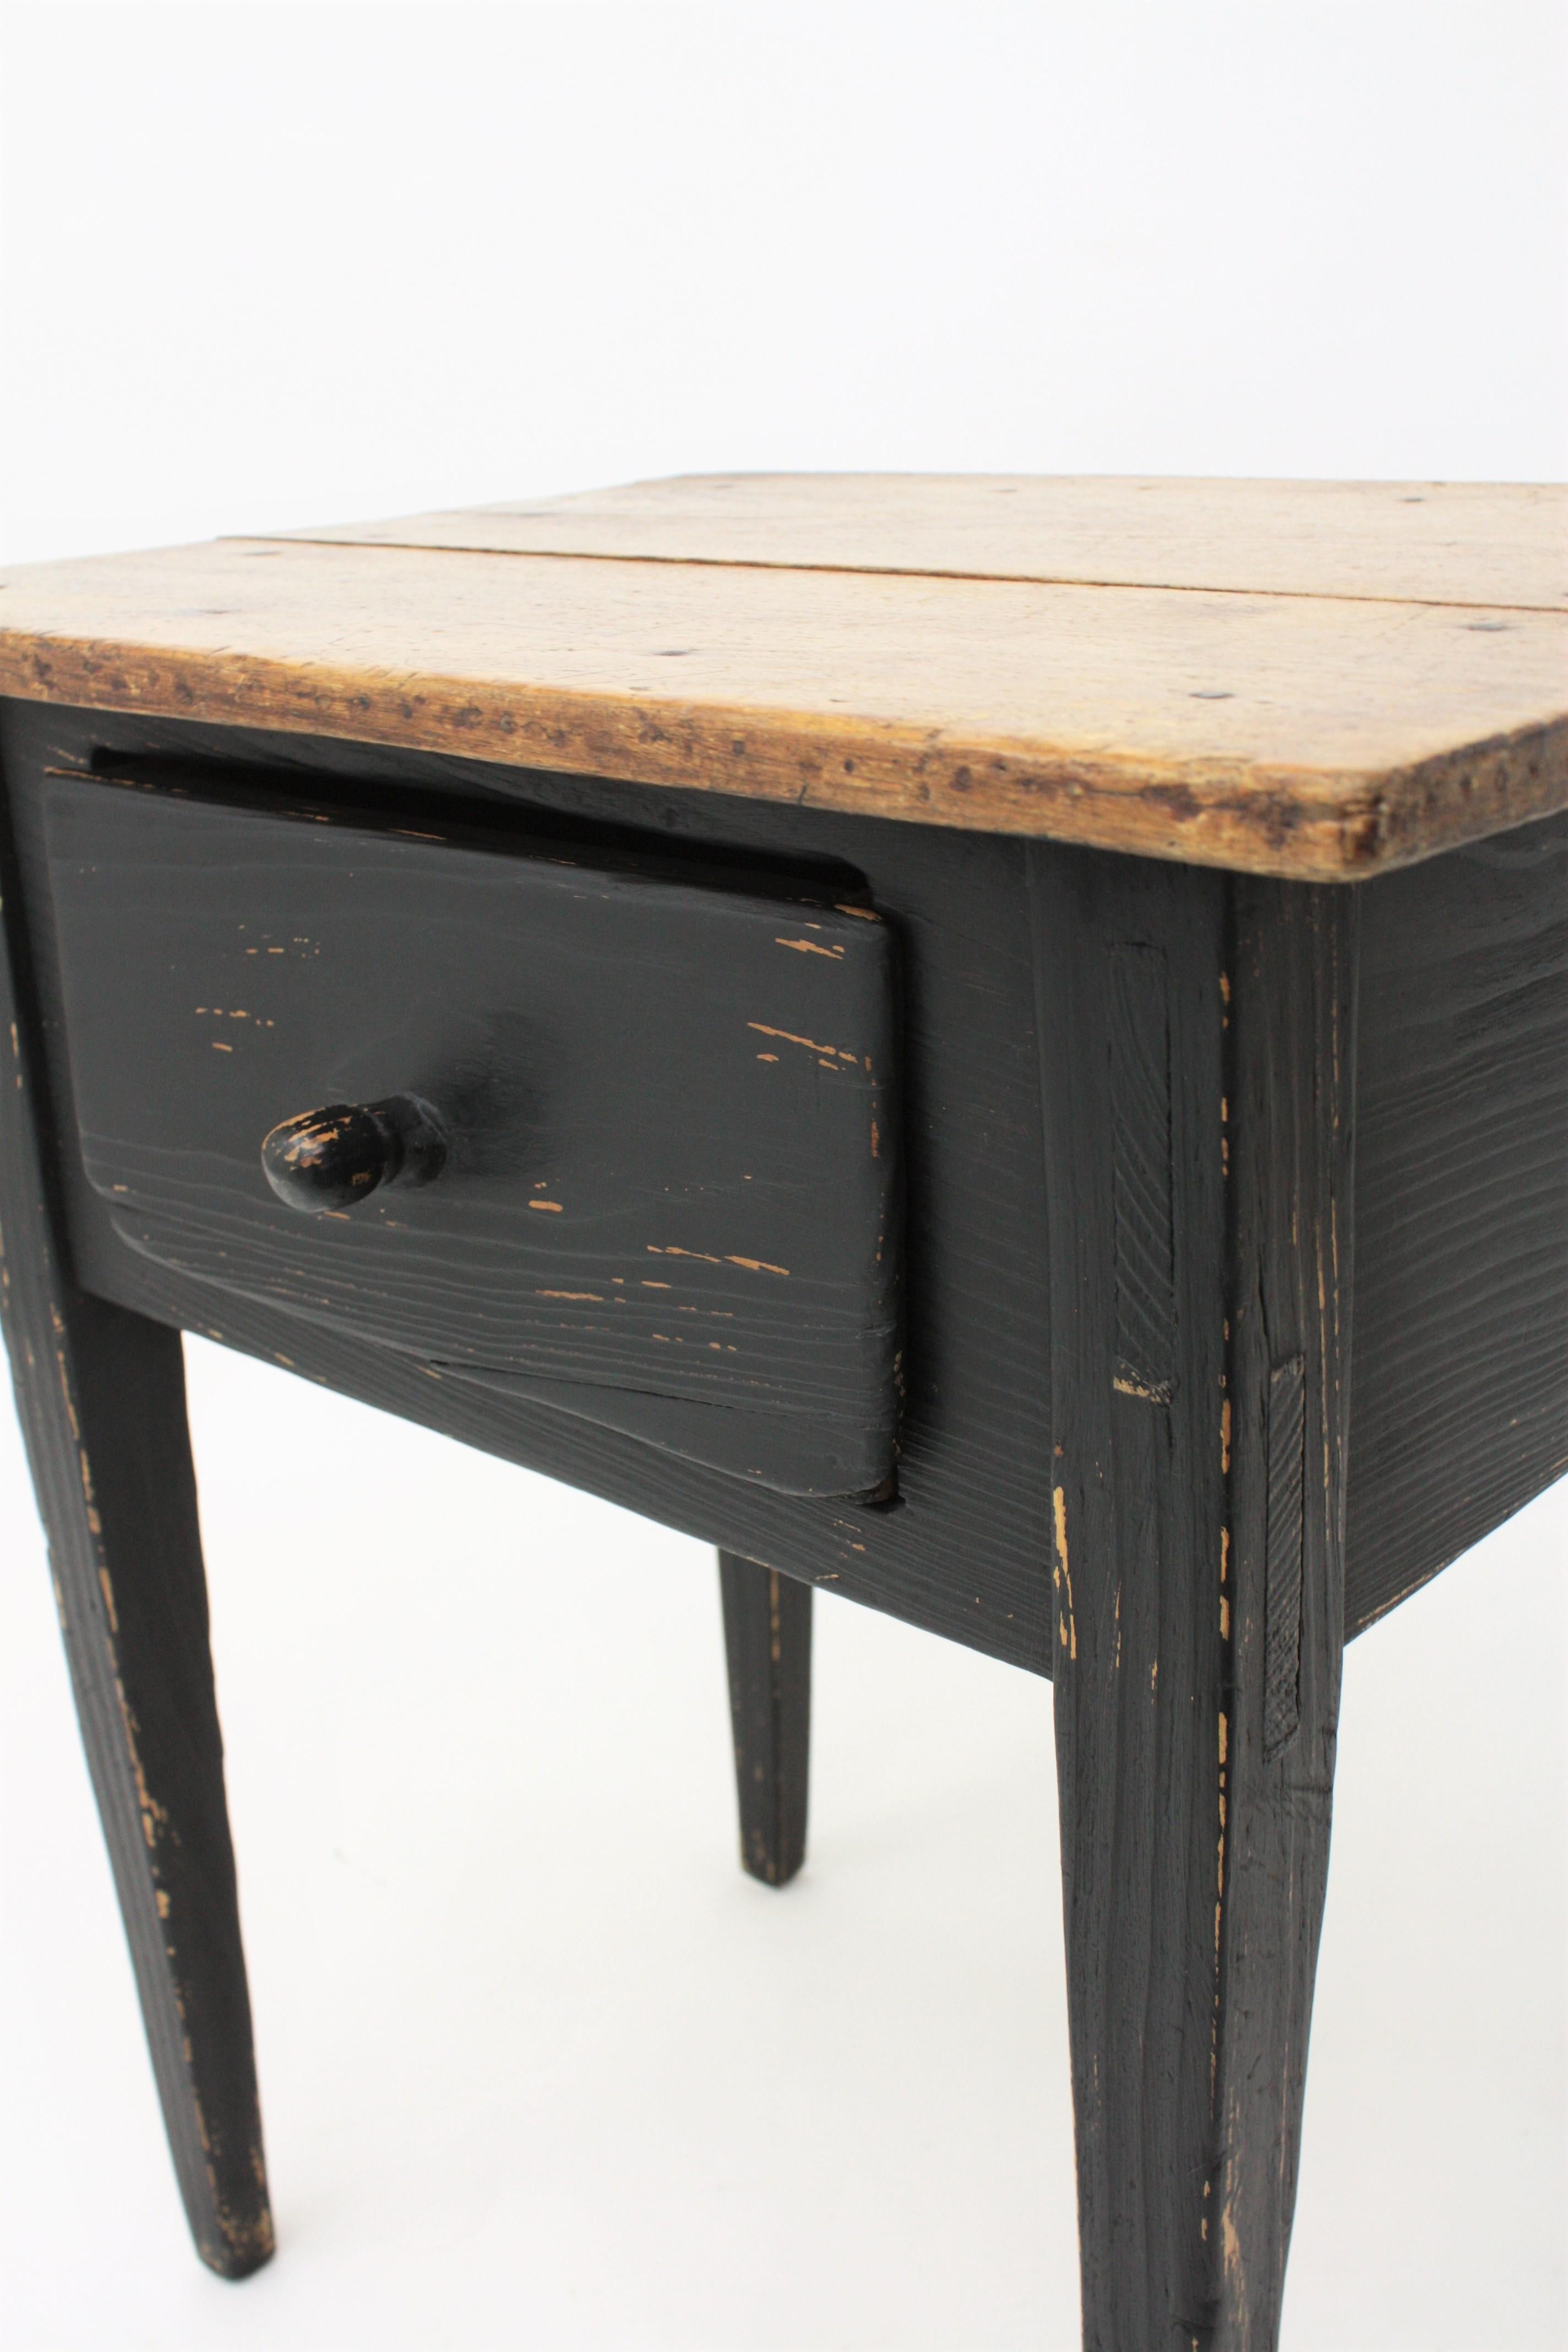 20th Century Spanish Single Drawer Rustic Table in Black Patina